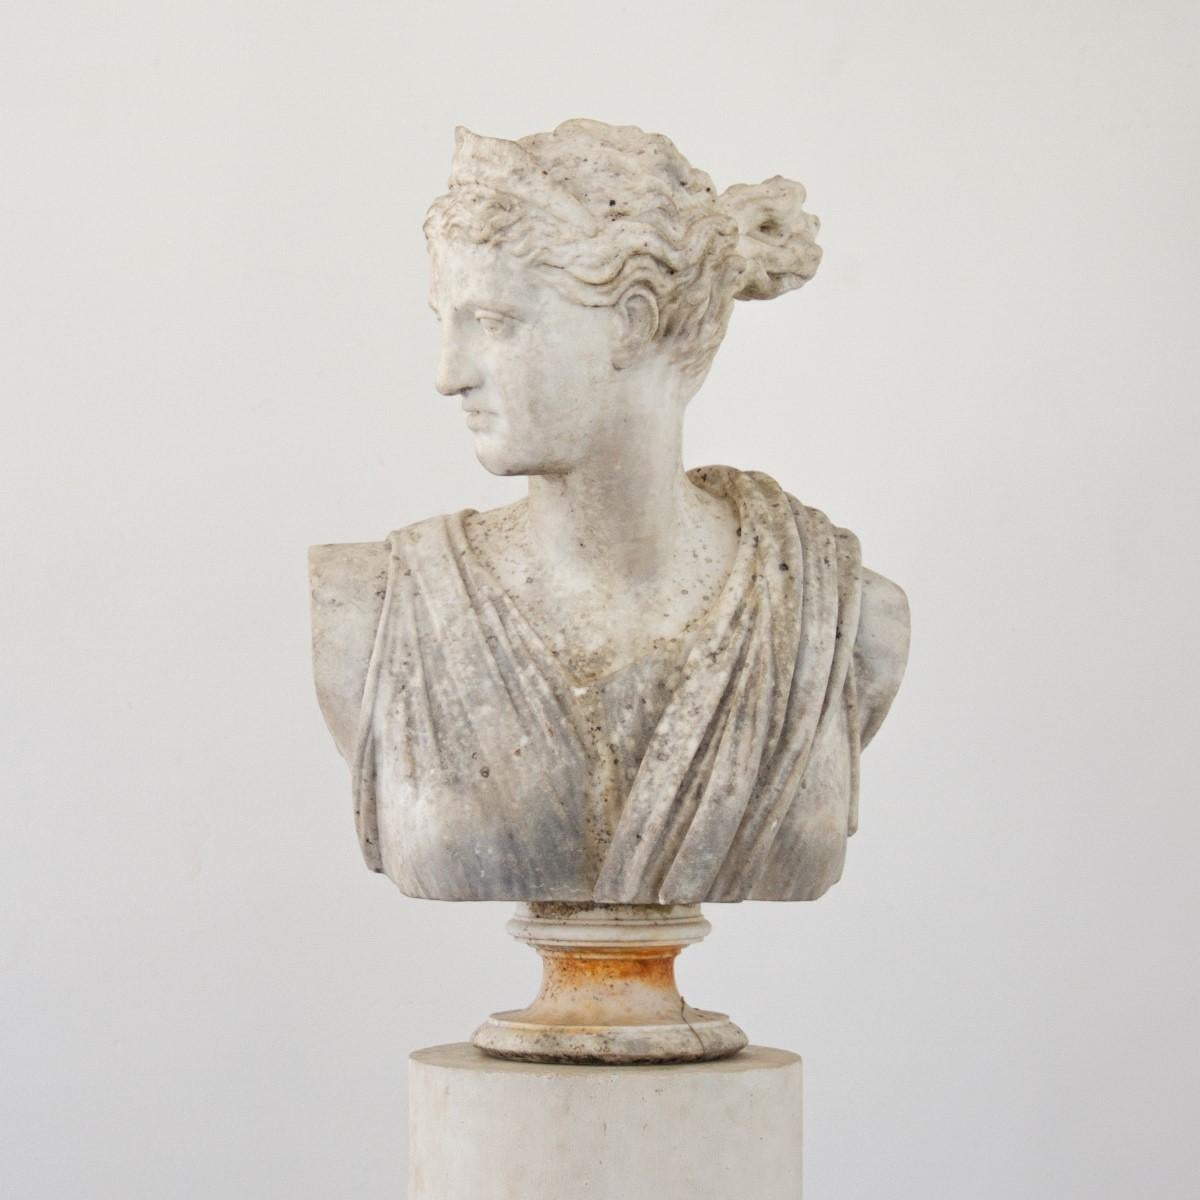 A large marble bust of Diana the Huntress.

Diana is a virgin goddess in Roman and Hellenistic religion, primarily considered a protector of childbirth, patroness of the countryside, hunters, crossroads, and the Moon. She is equated with the Greek